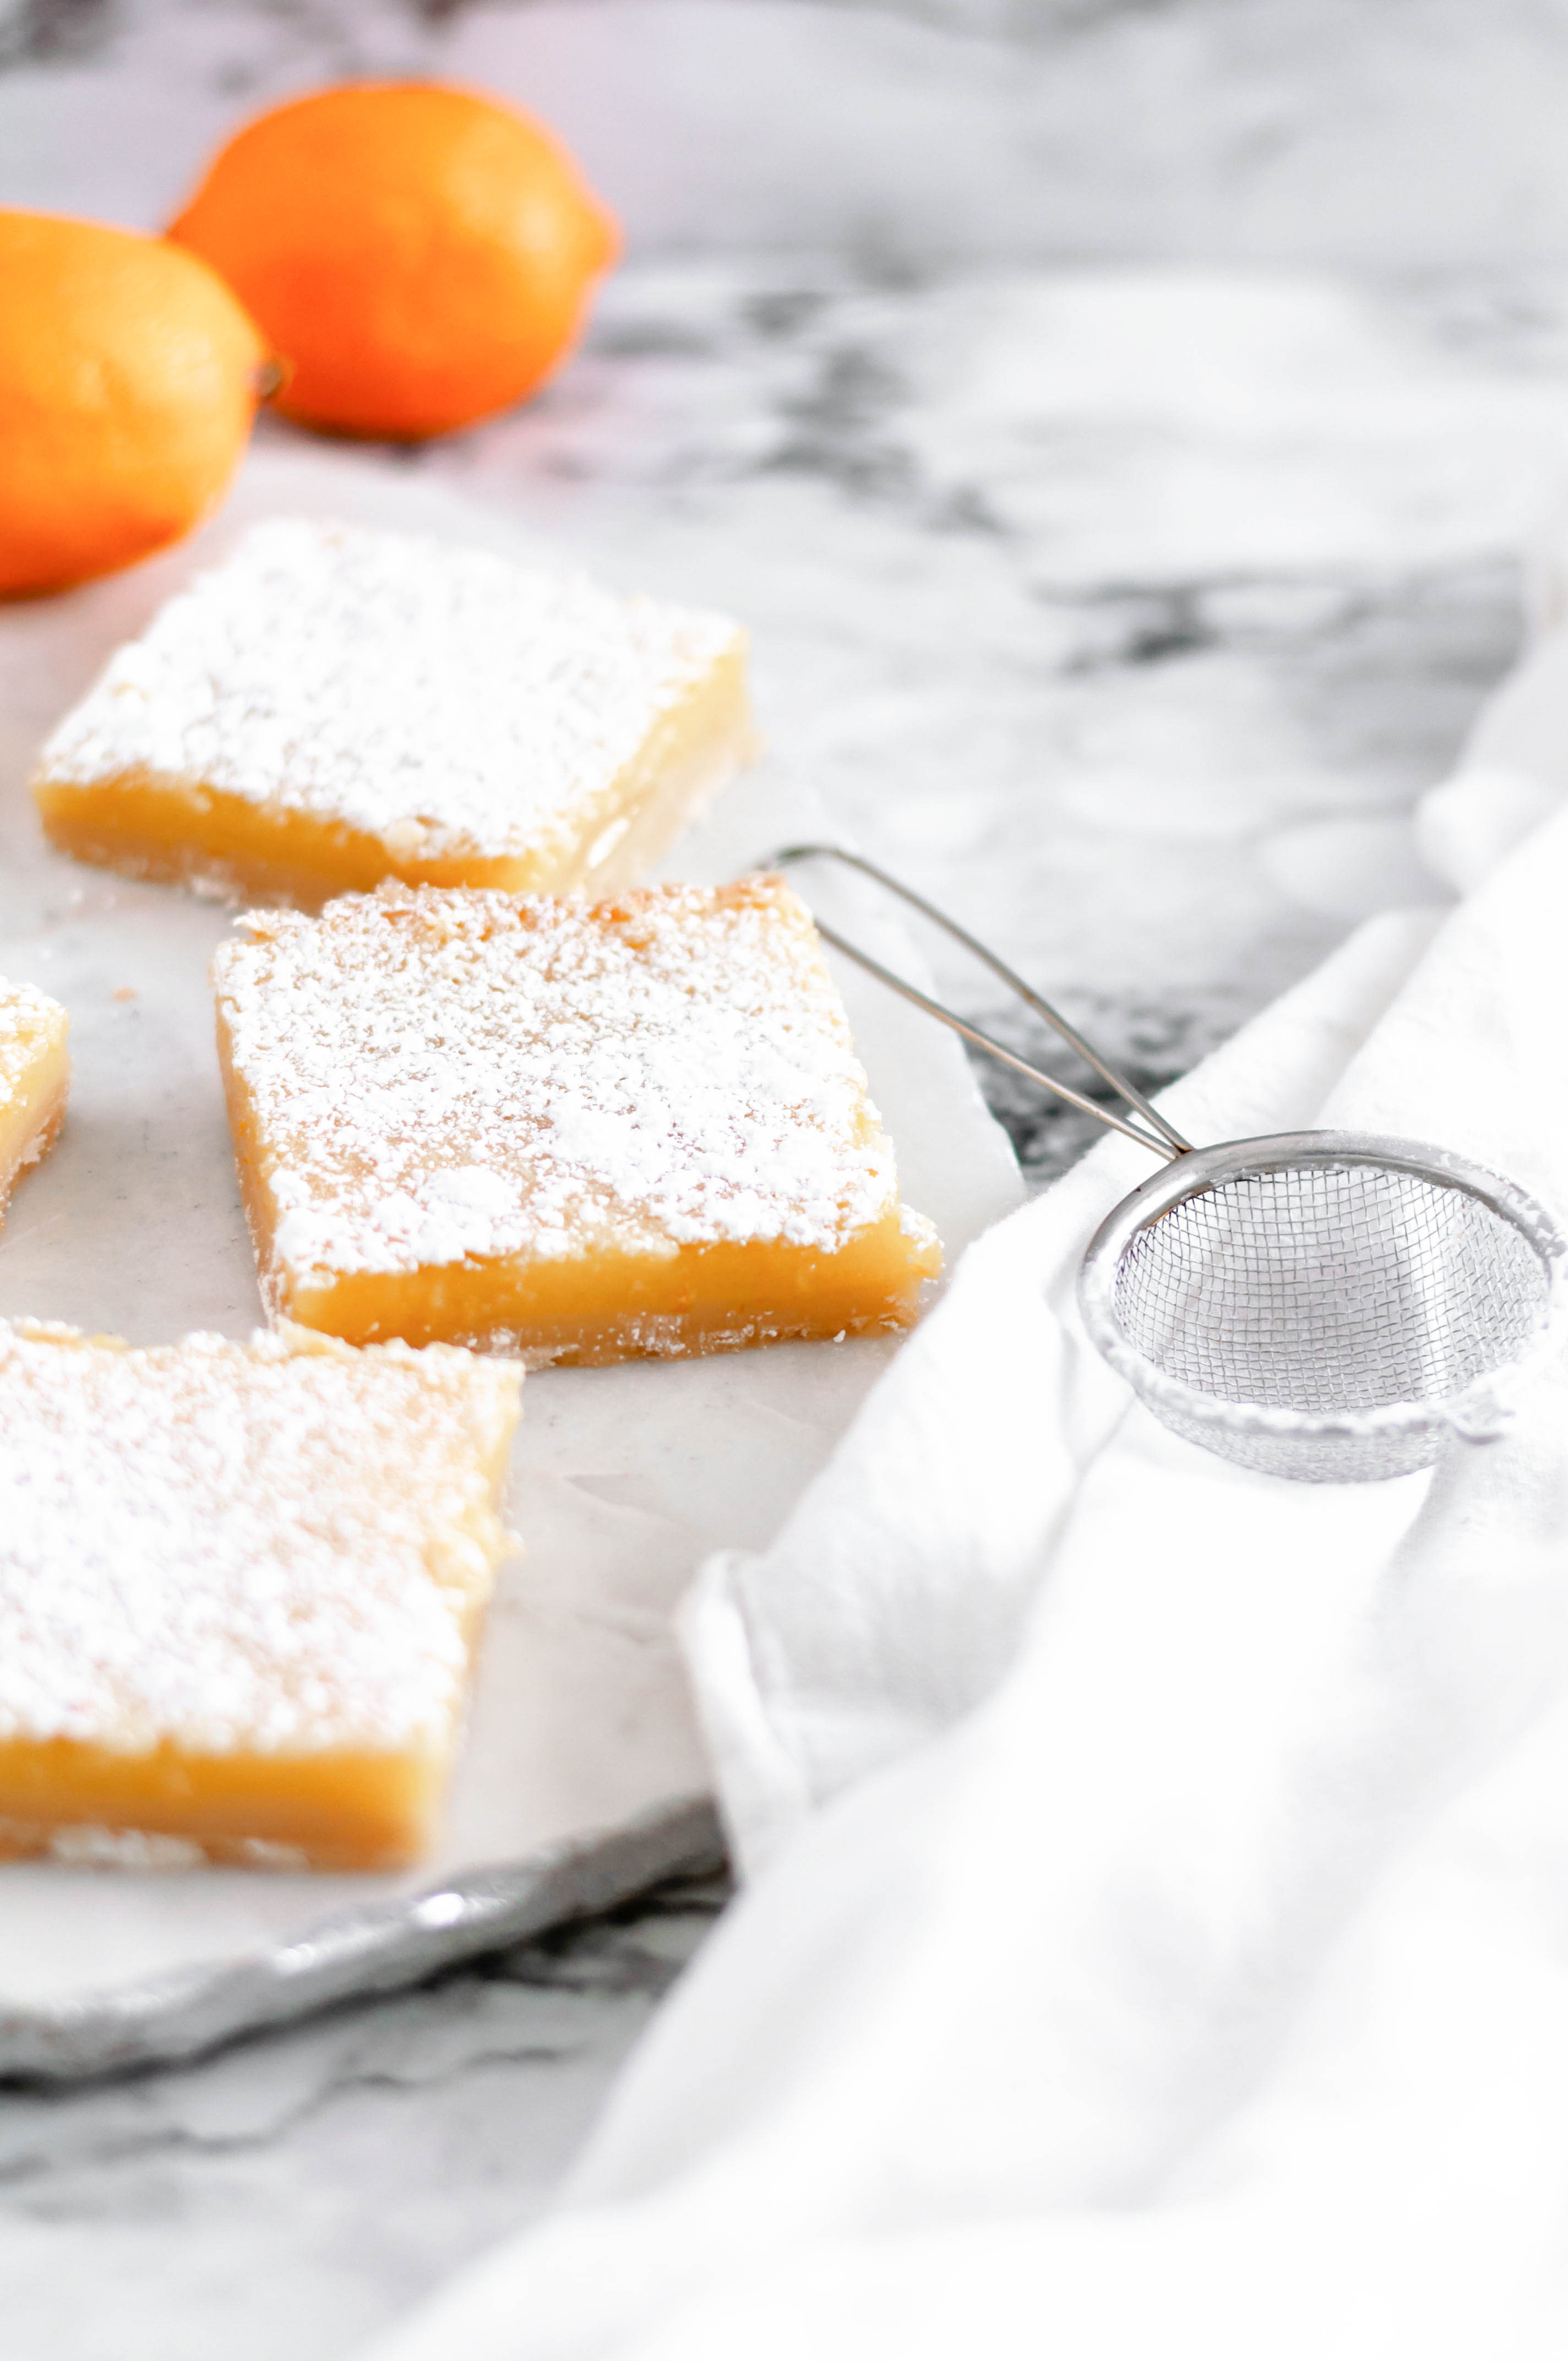 Classic Meyer Lemon Bars are a great option for Easter dessert. Simple to make with a great sweet, tart zing. Crumbly, sweet shortbread and tart meyer lemon filling.